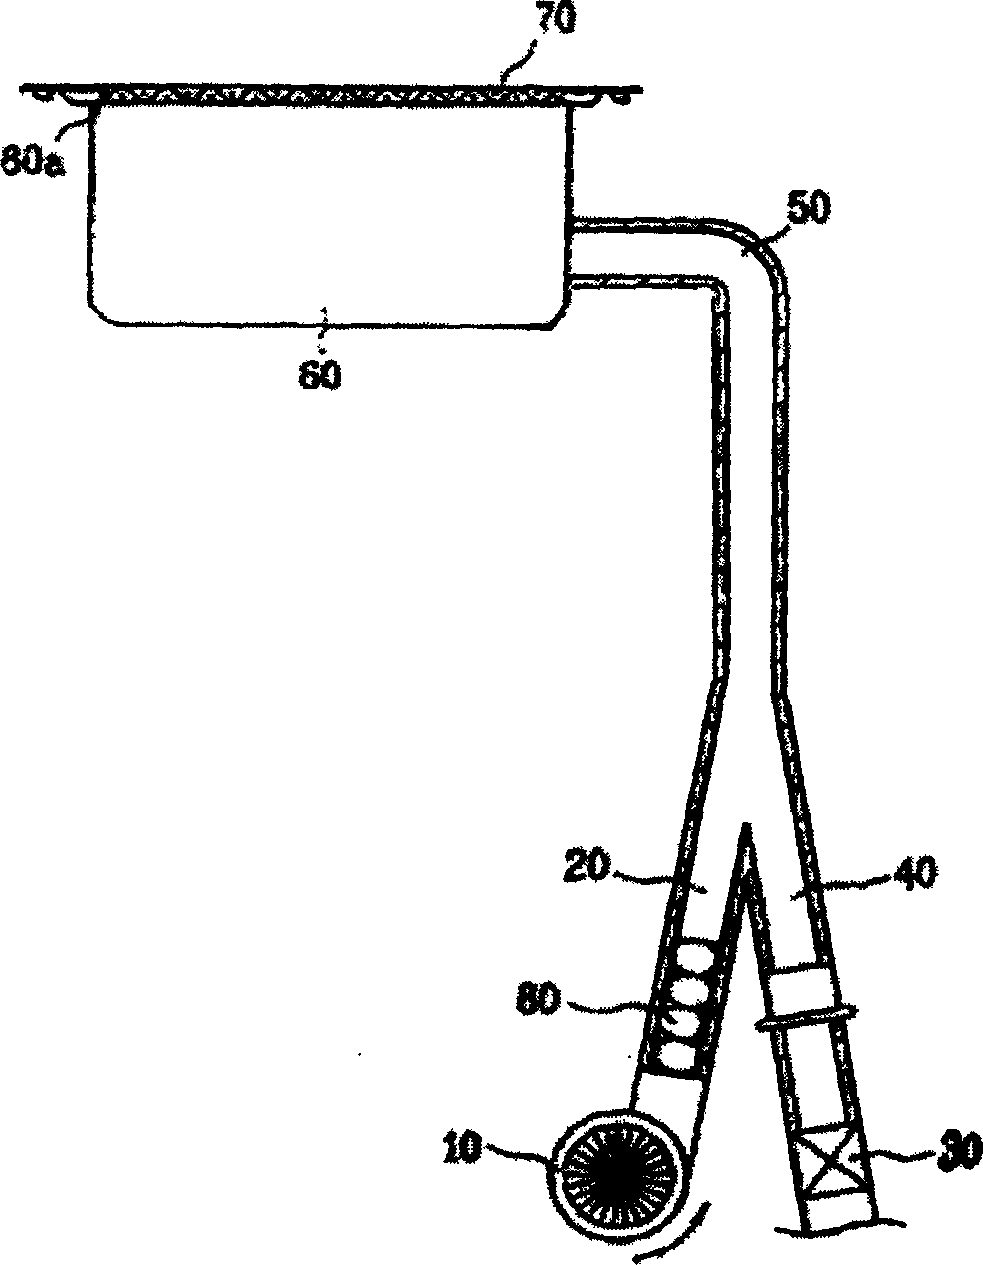 Air and gas supply structure of gas radiant furnace